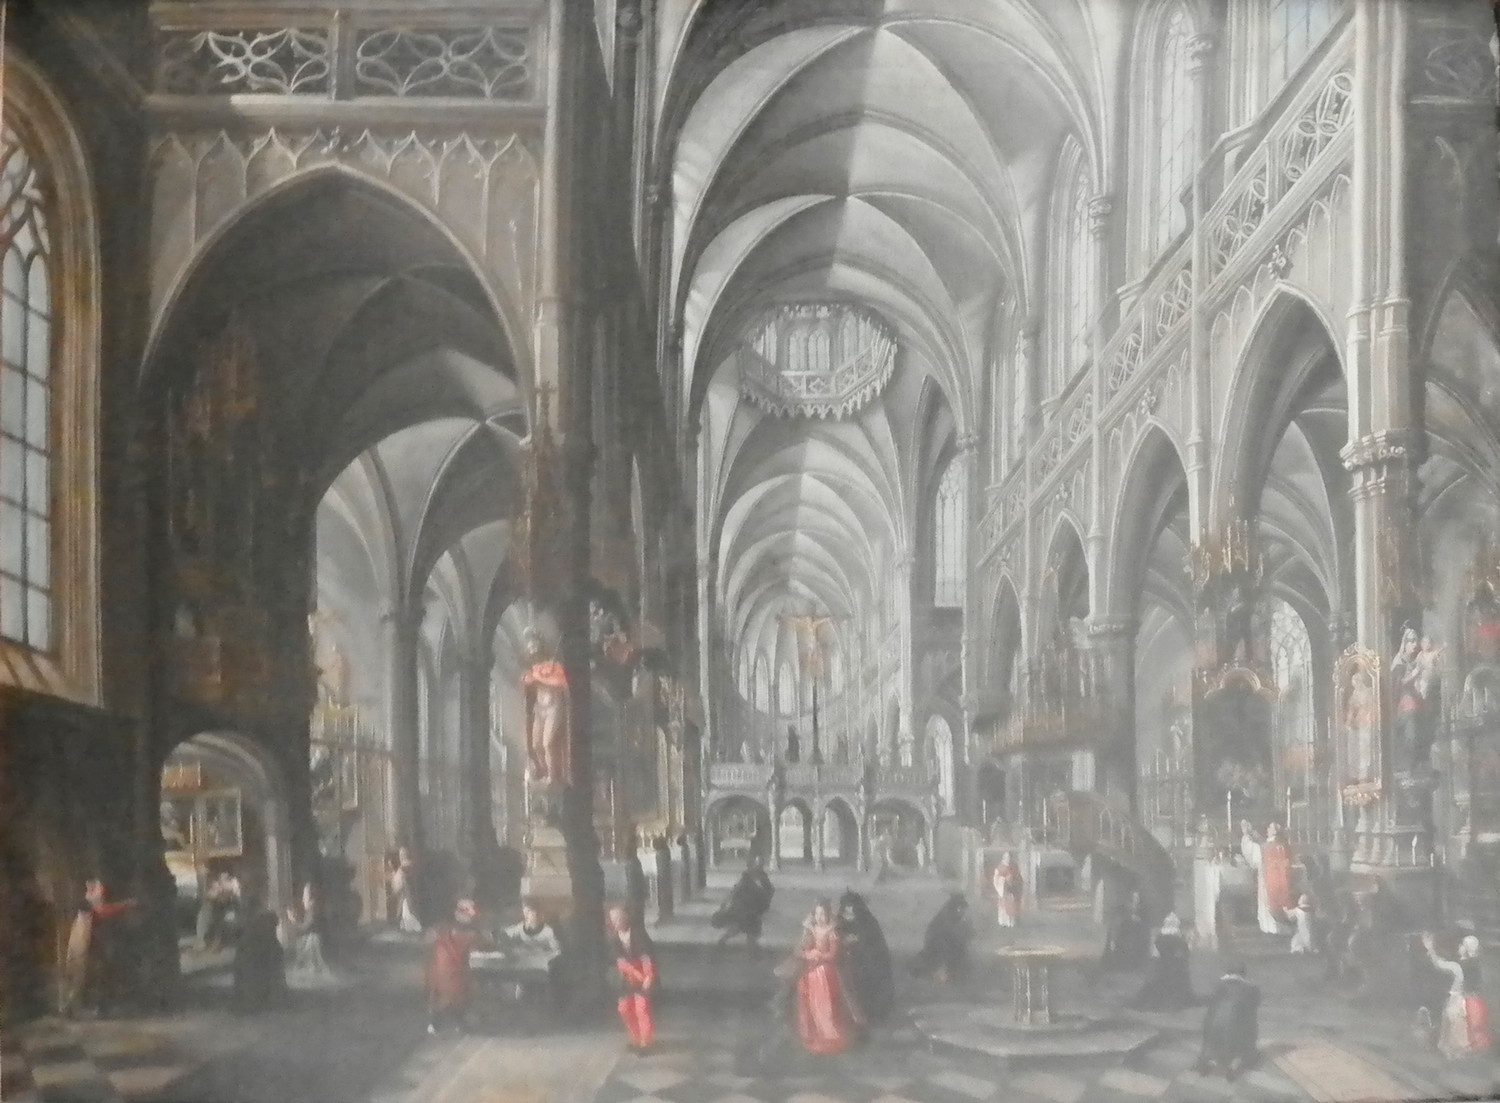 Interior of a Cathedral